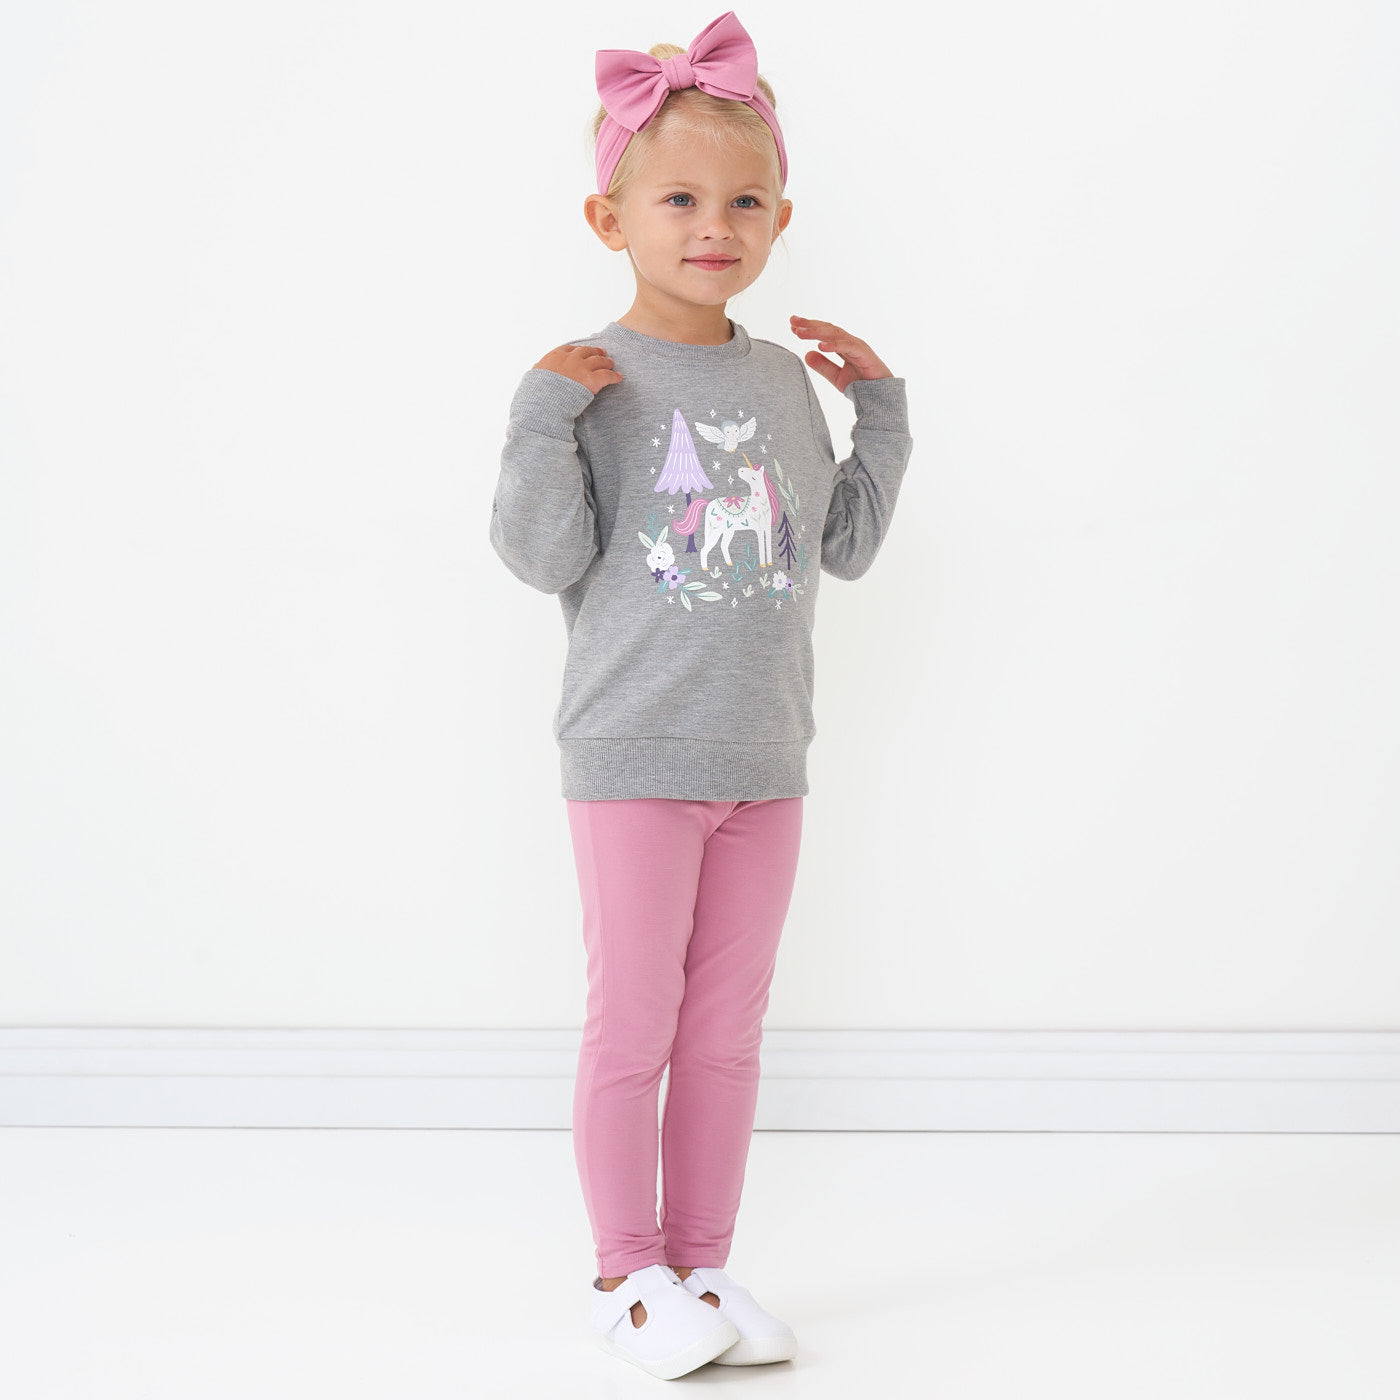 Child wearing Garden Rose Cozy Leggings paired with winter collection play styles and a luxe bow headband